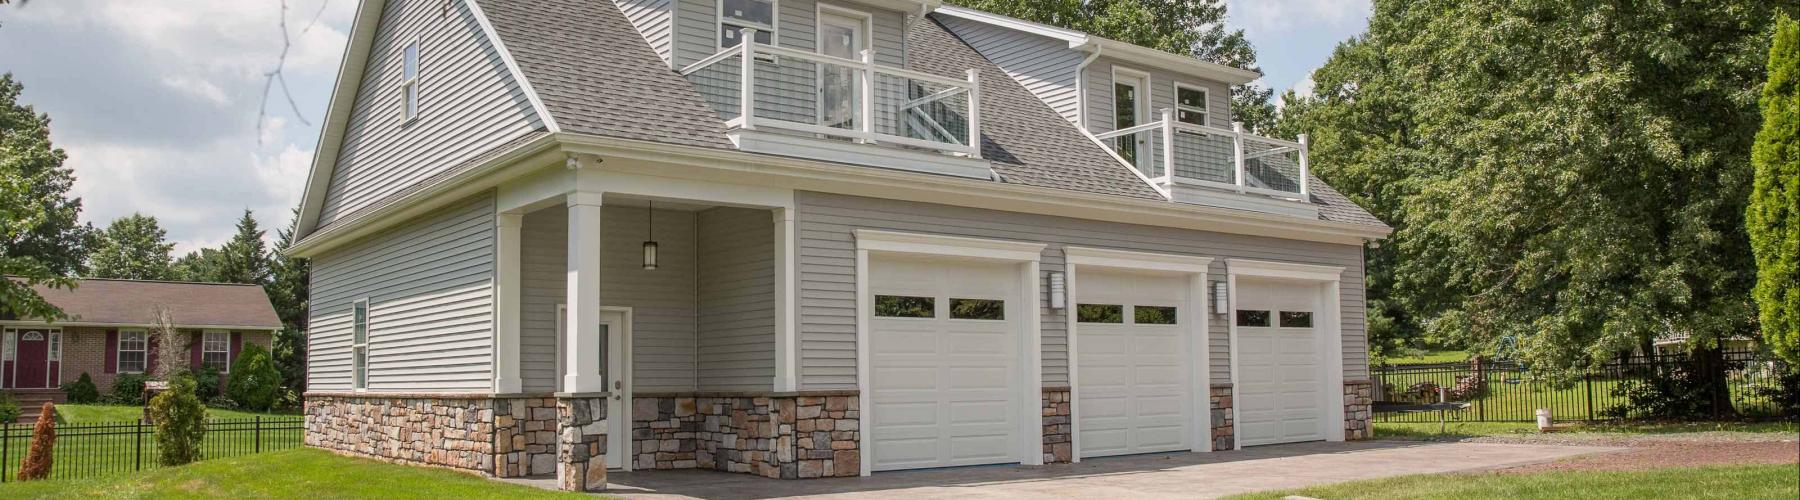 New garage by Stable Hollow Construction